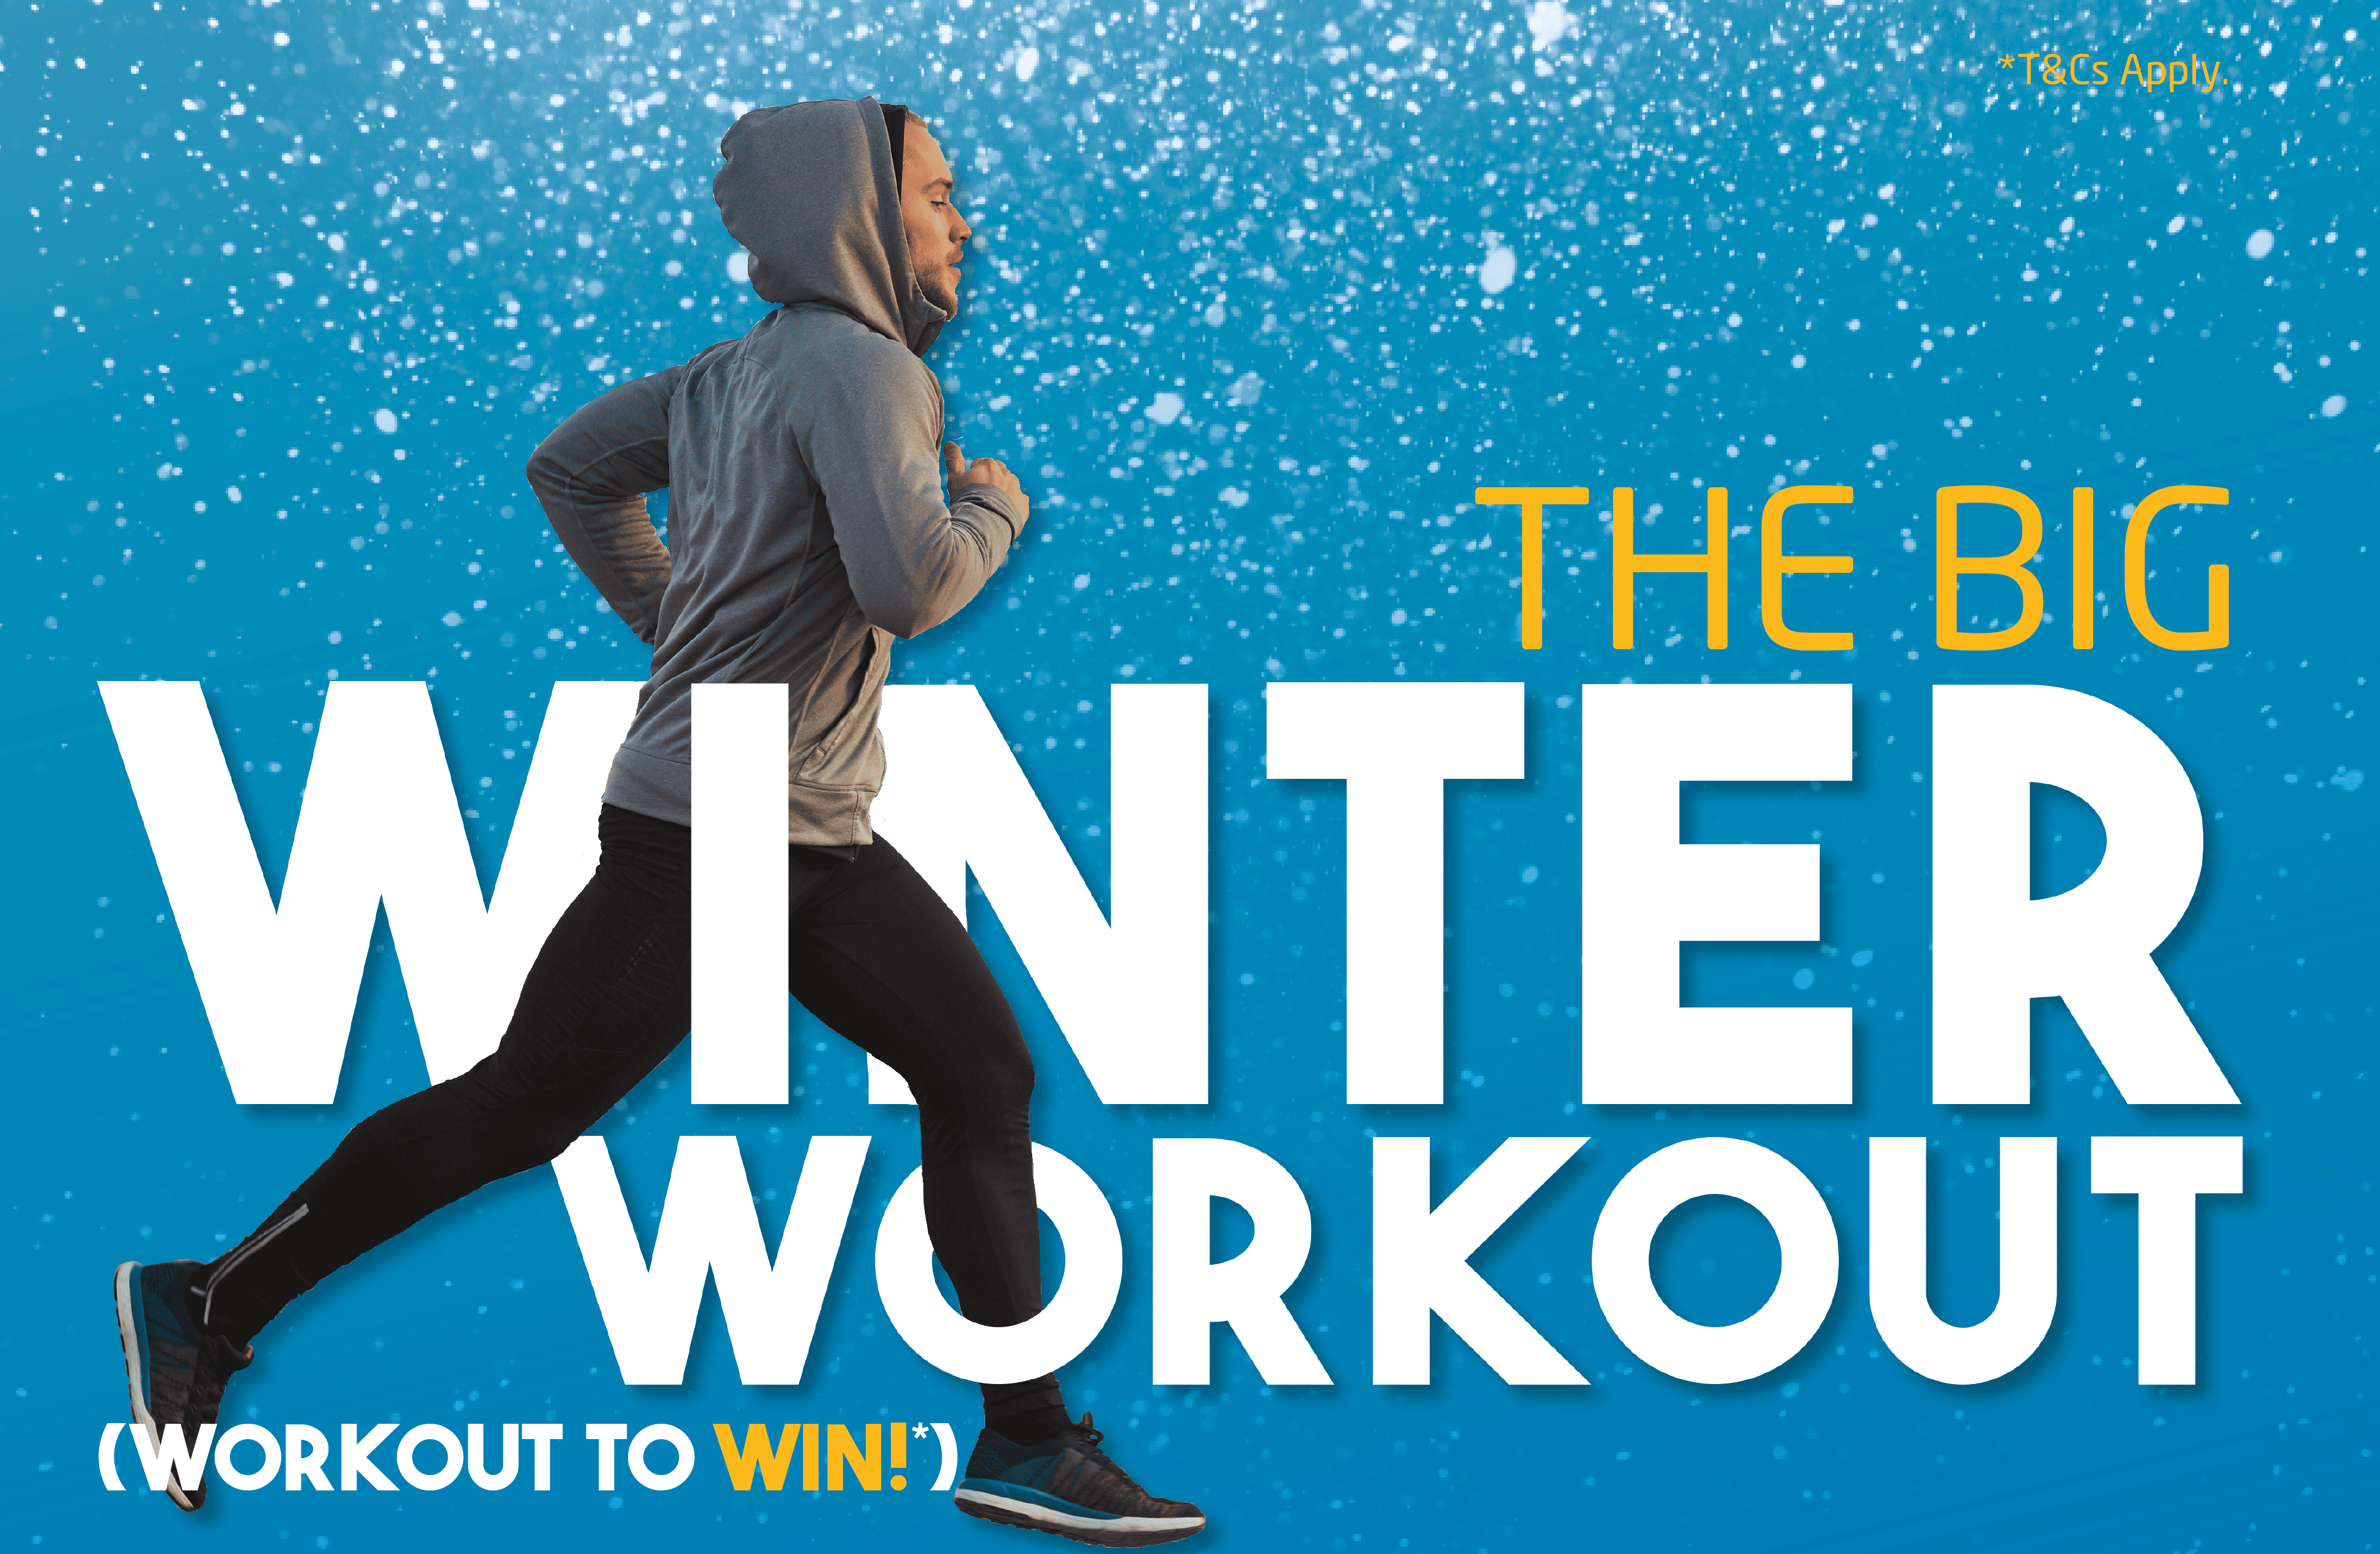 Join The Big Winter Workout ❄️